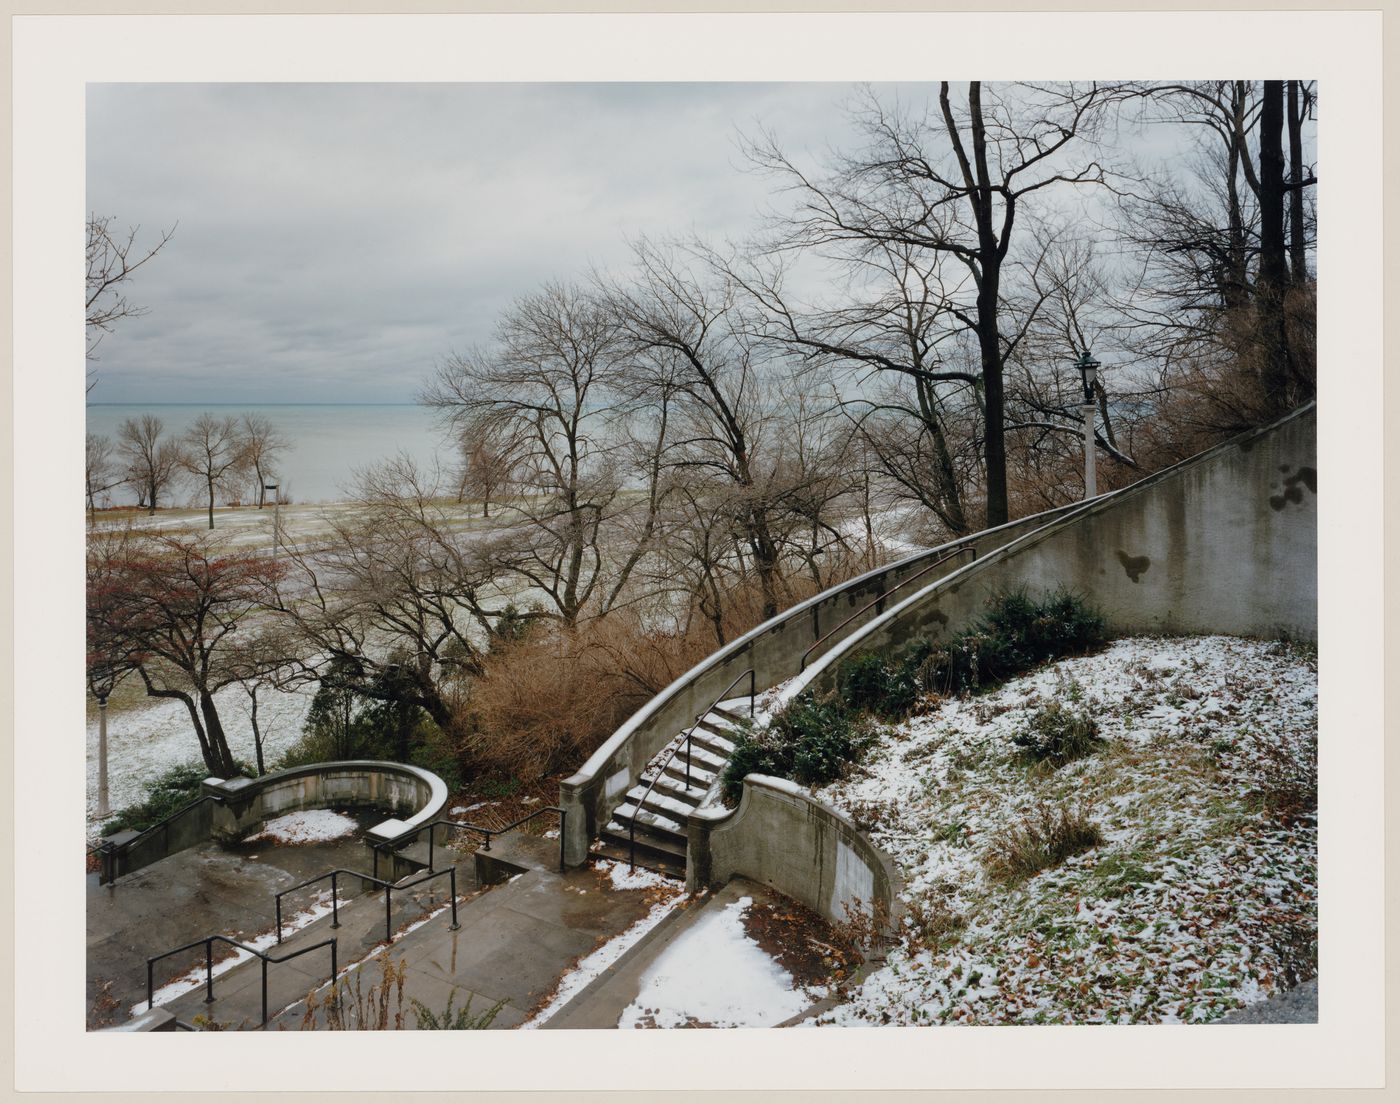 Viewing Olmsted: View of Stairs from the pavilion, Lake Park, Milwaukee, Wisconsin